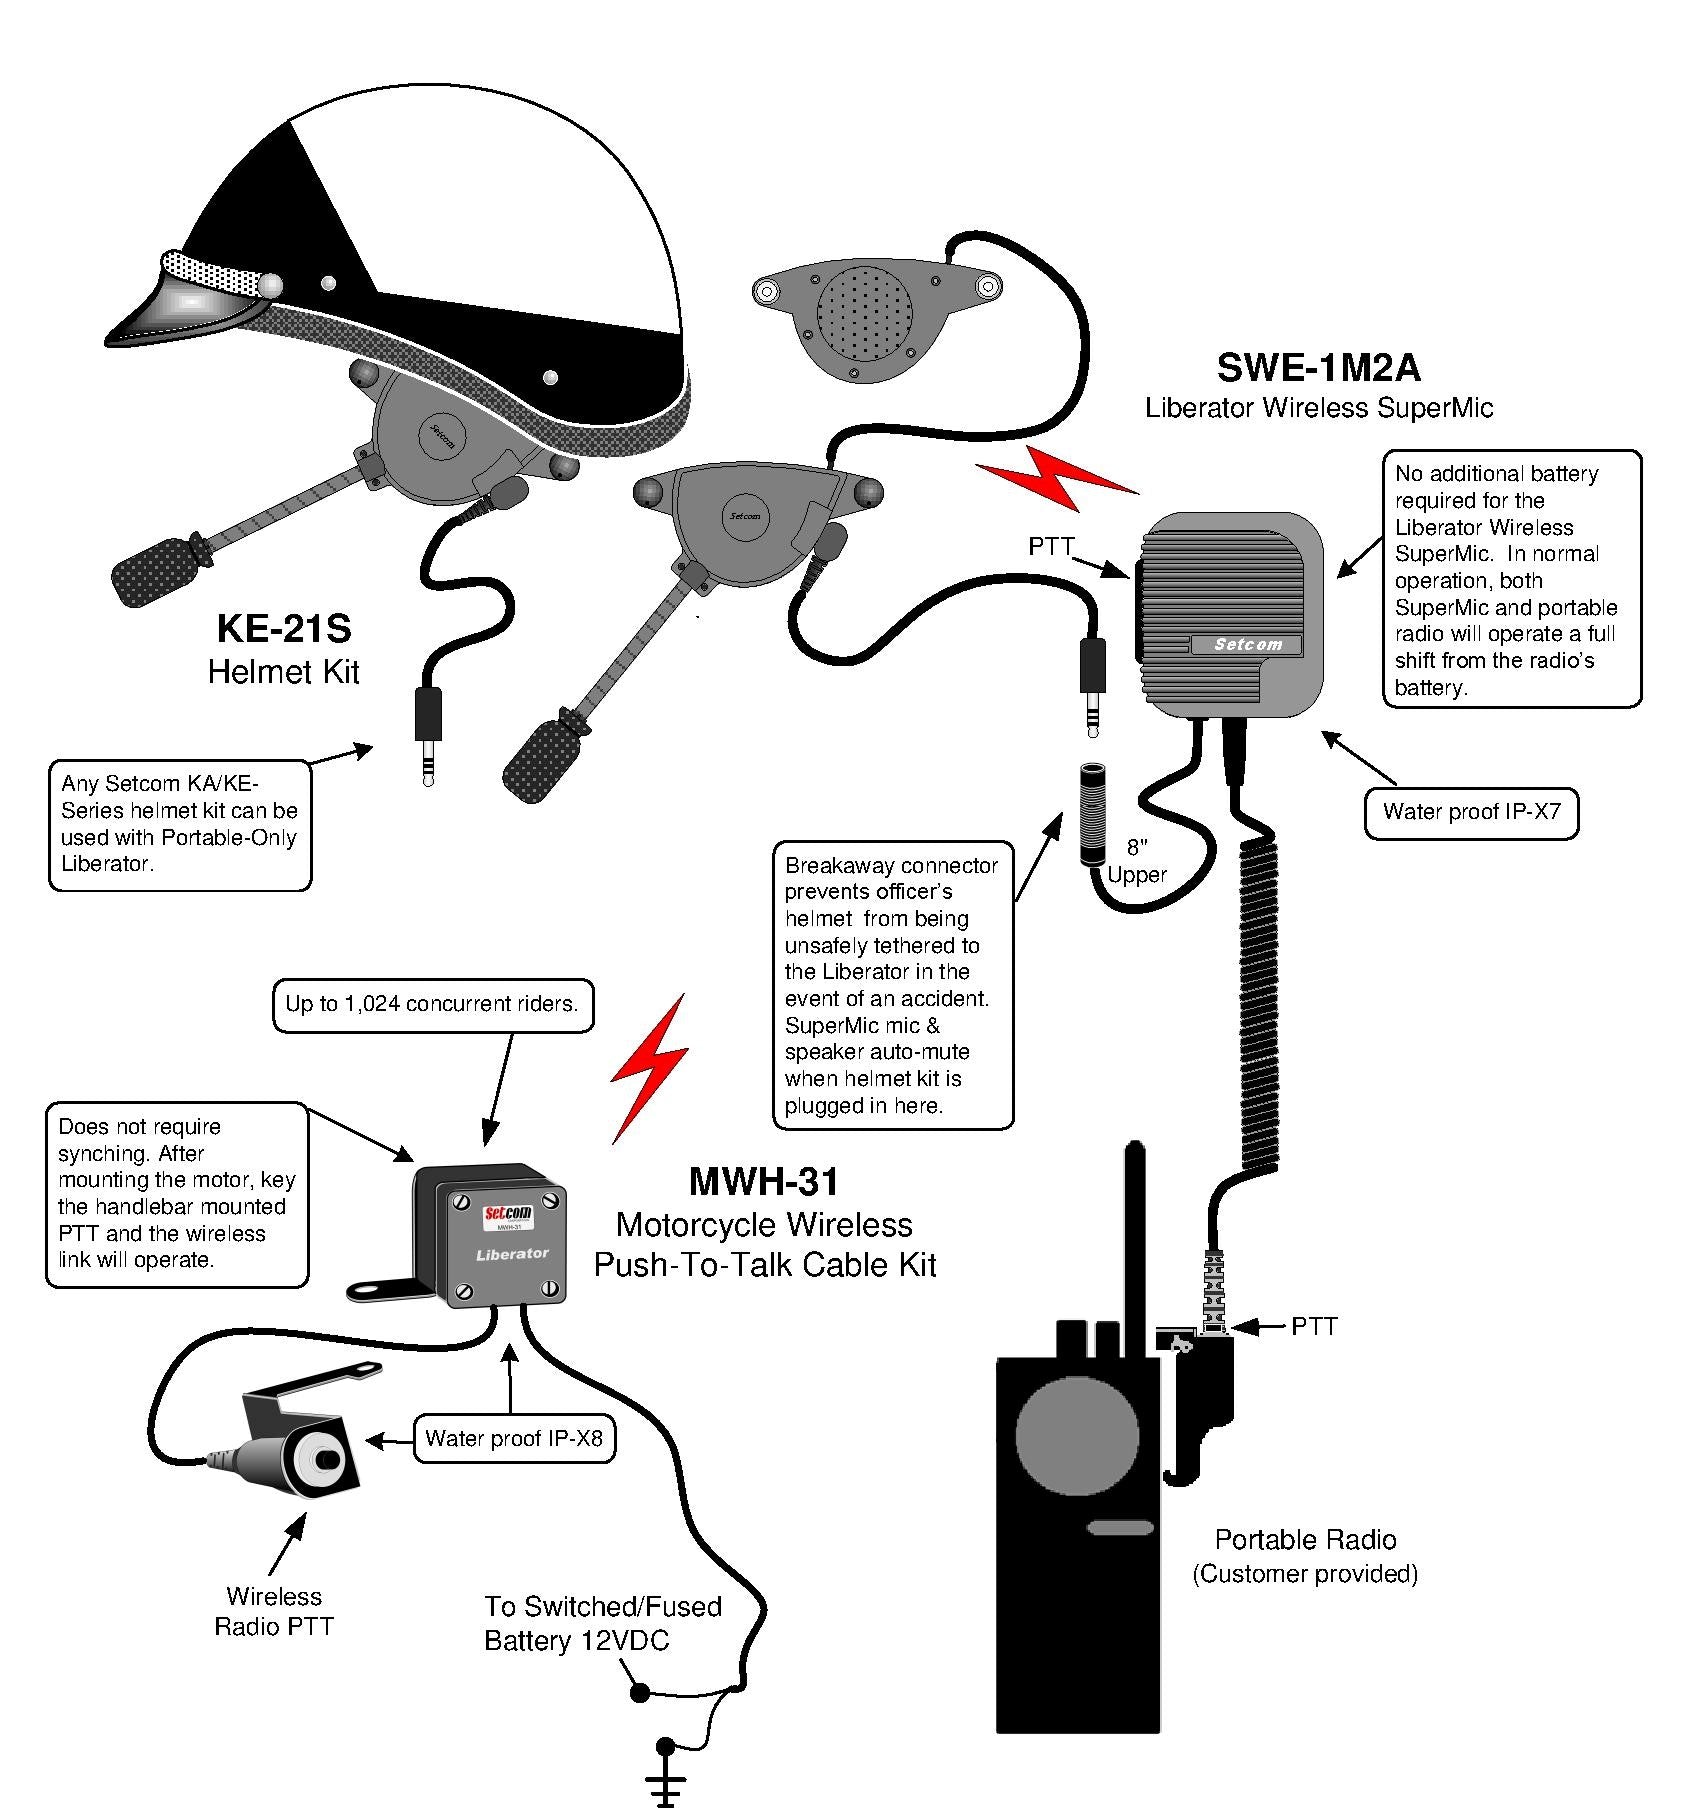 Motorcycle Communications Kit for Mobile Two-Way Radios and Half Shell Helmets